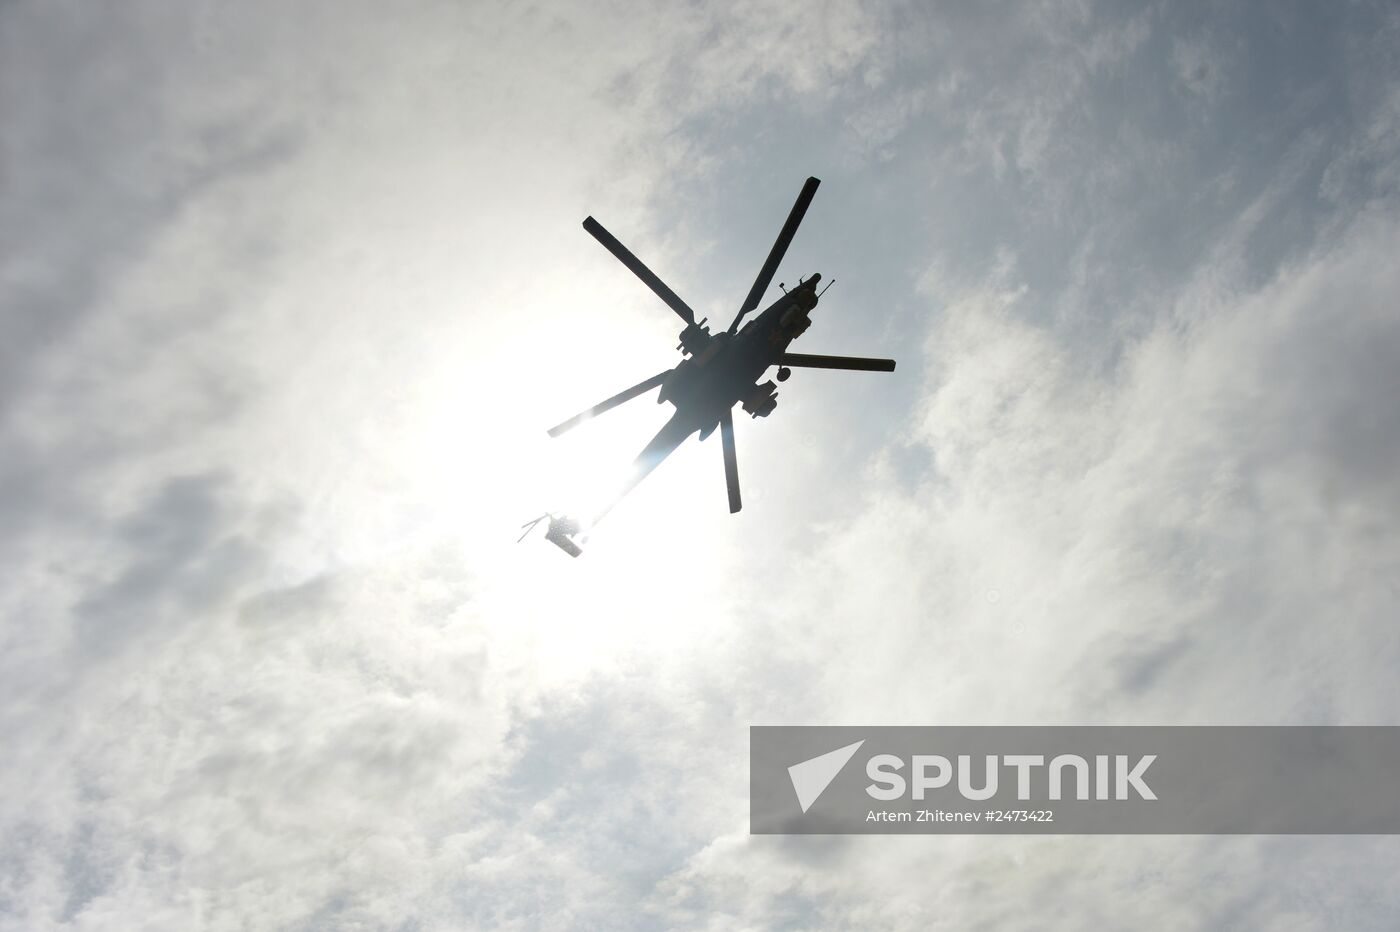 Military aviation exercise in southern Russia